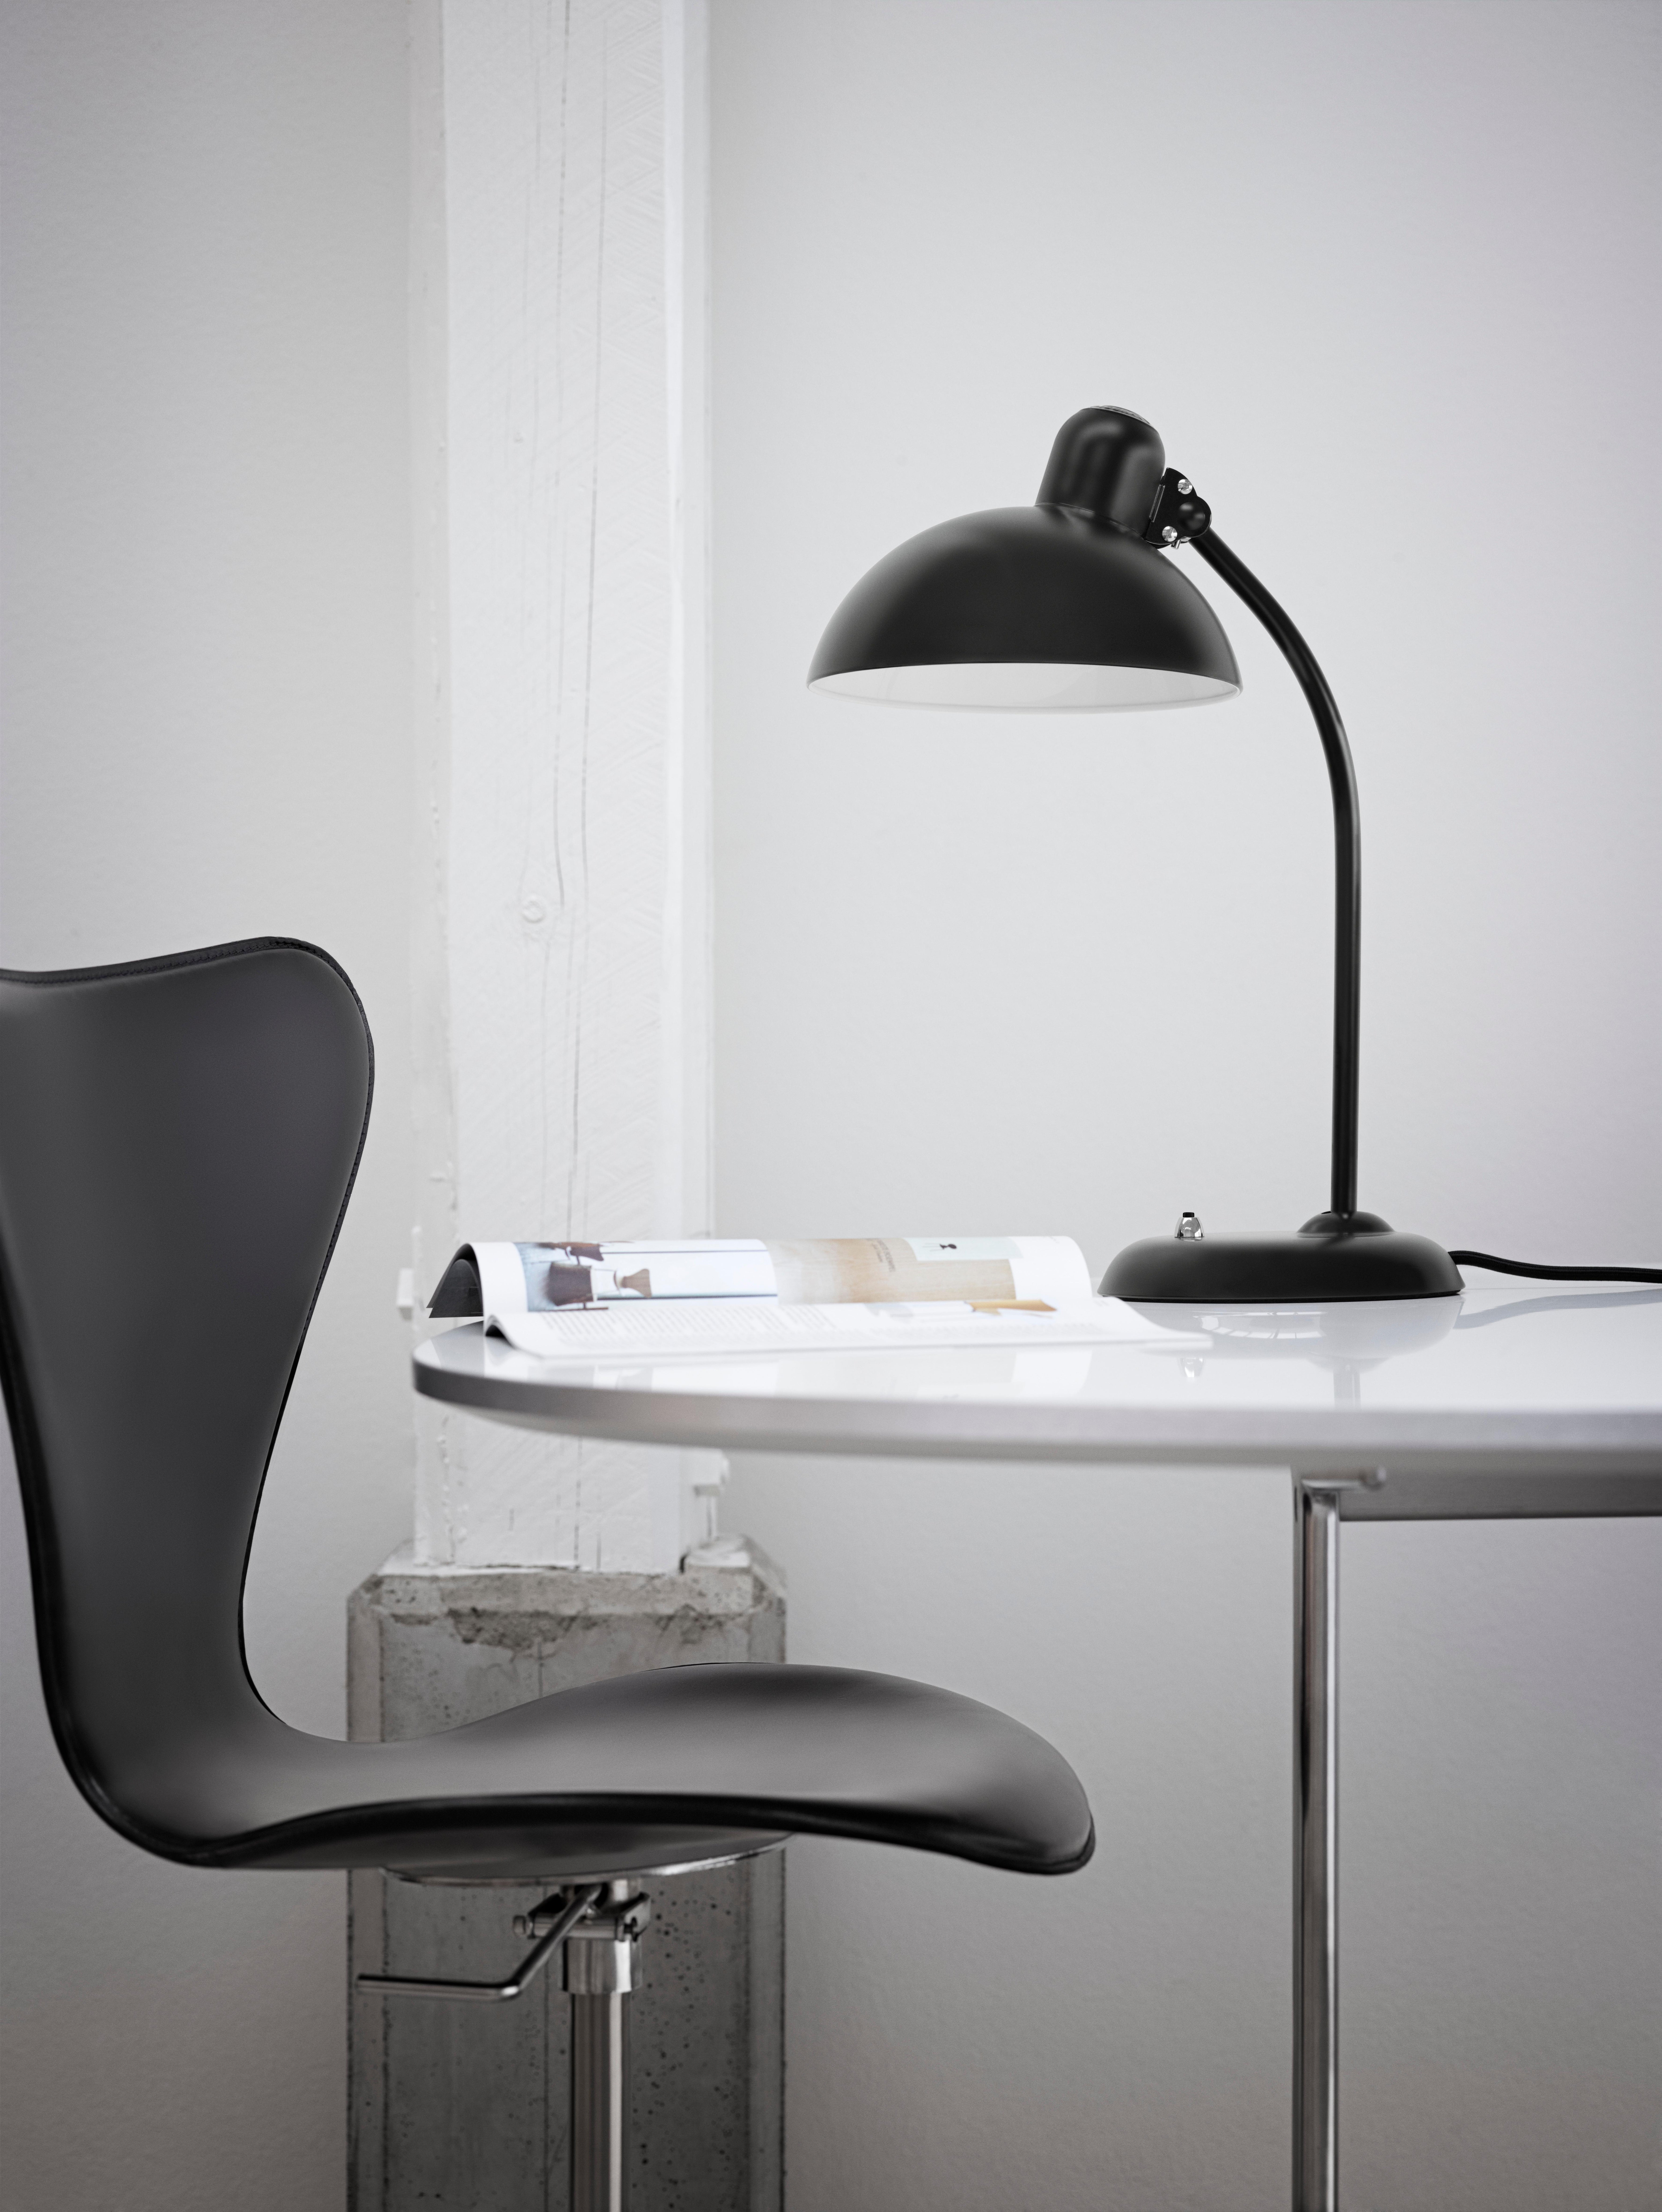 Christian Dell 'Kaiser Idell 6556-T' Table Lamp for Fritz Hansen in Matte Black.

 Established in 1872, Fritz Hansen has become synonymous with legendary Danish design. Combining timeless craftsmanship with an emphasis on sustainability, the brand’s